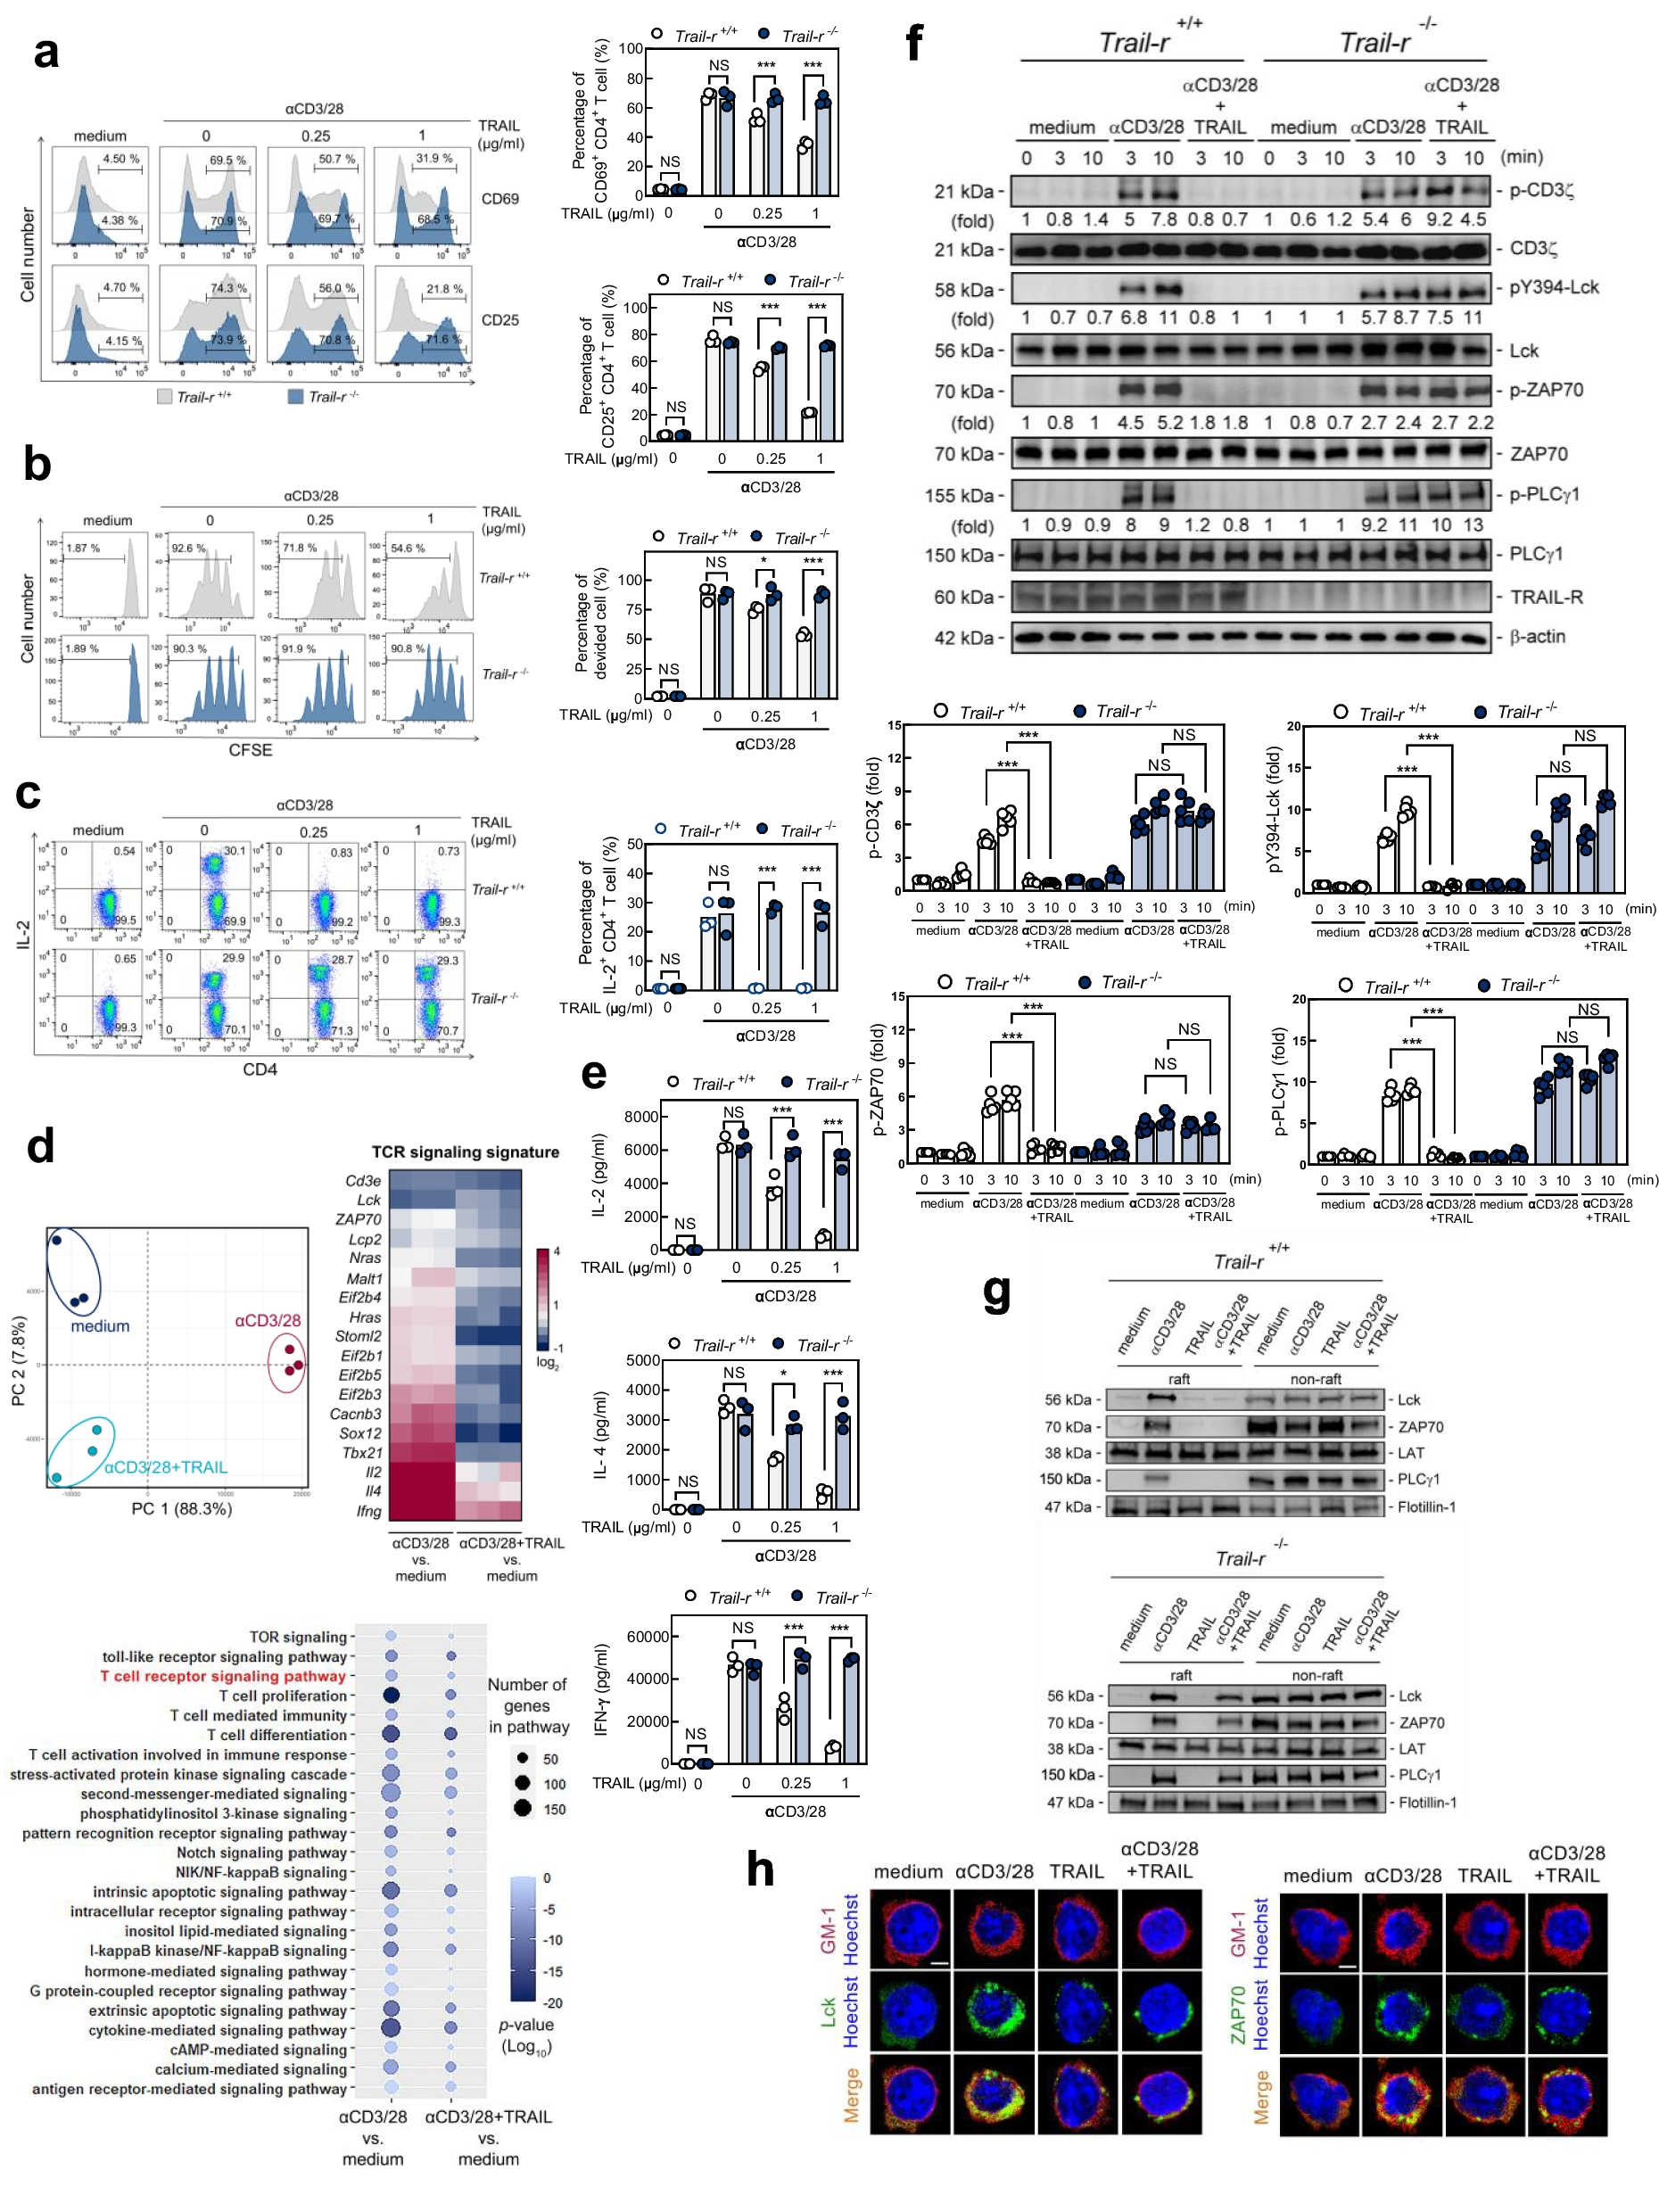 Association of TRAIL receptor with phosphatase SHP-1 enables repressing T cell receptor signaling and T cell activation through inactivating Lck